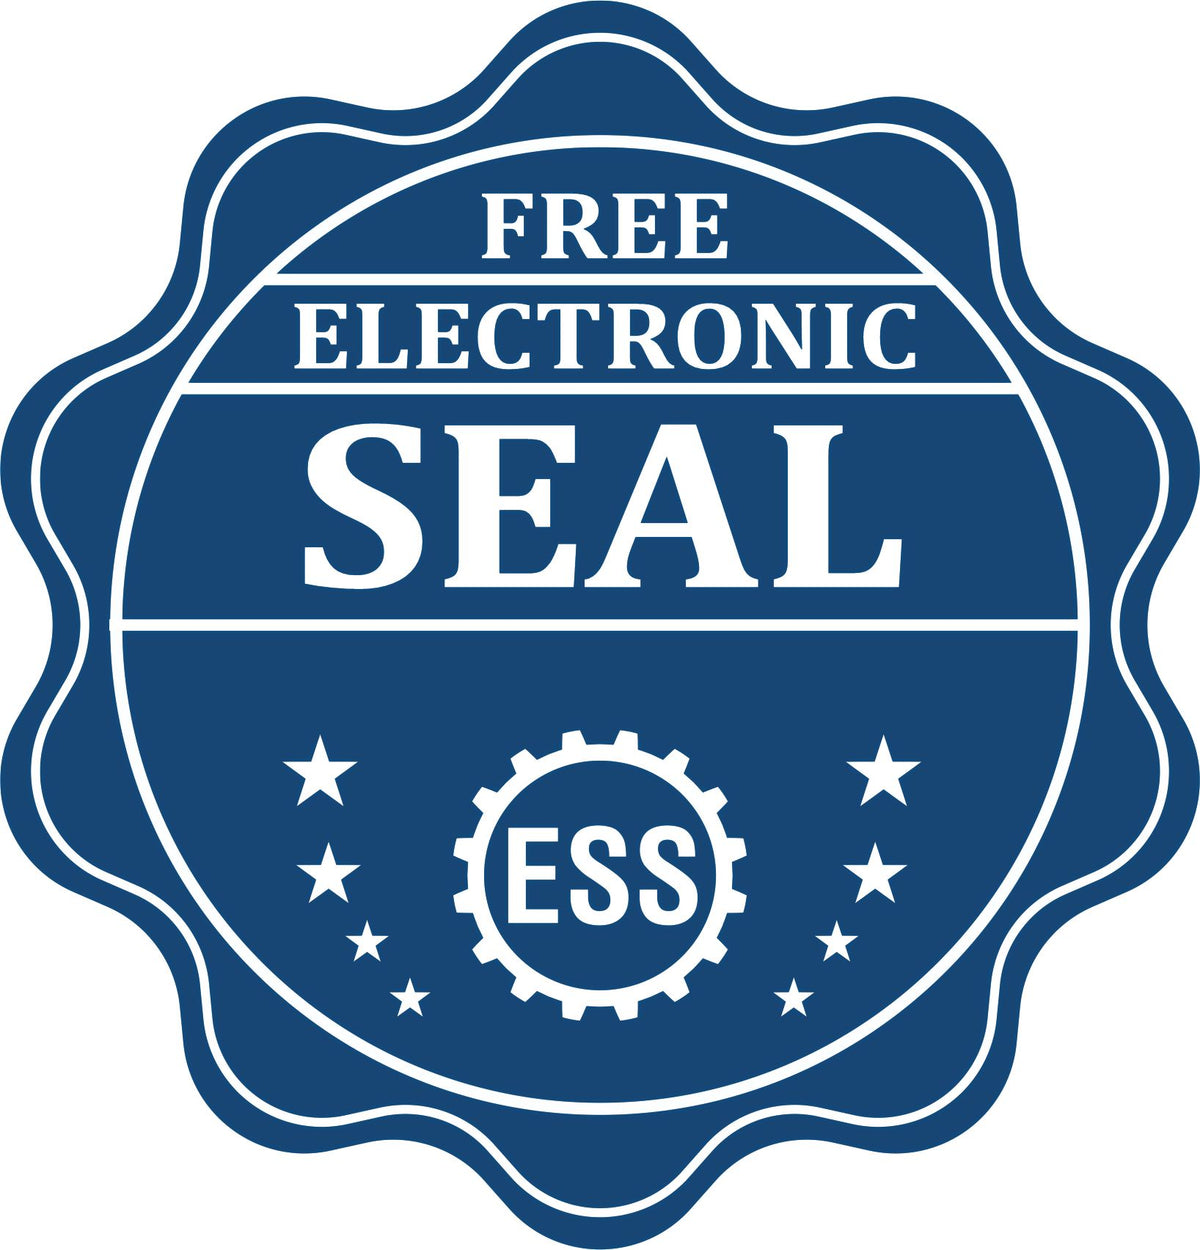 A badge showing a free electronic seal for the State of New Jersey Soft Land Surveyor Embossing Seal with stars and the ESS gear on the emblem.